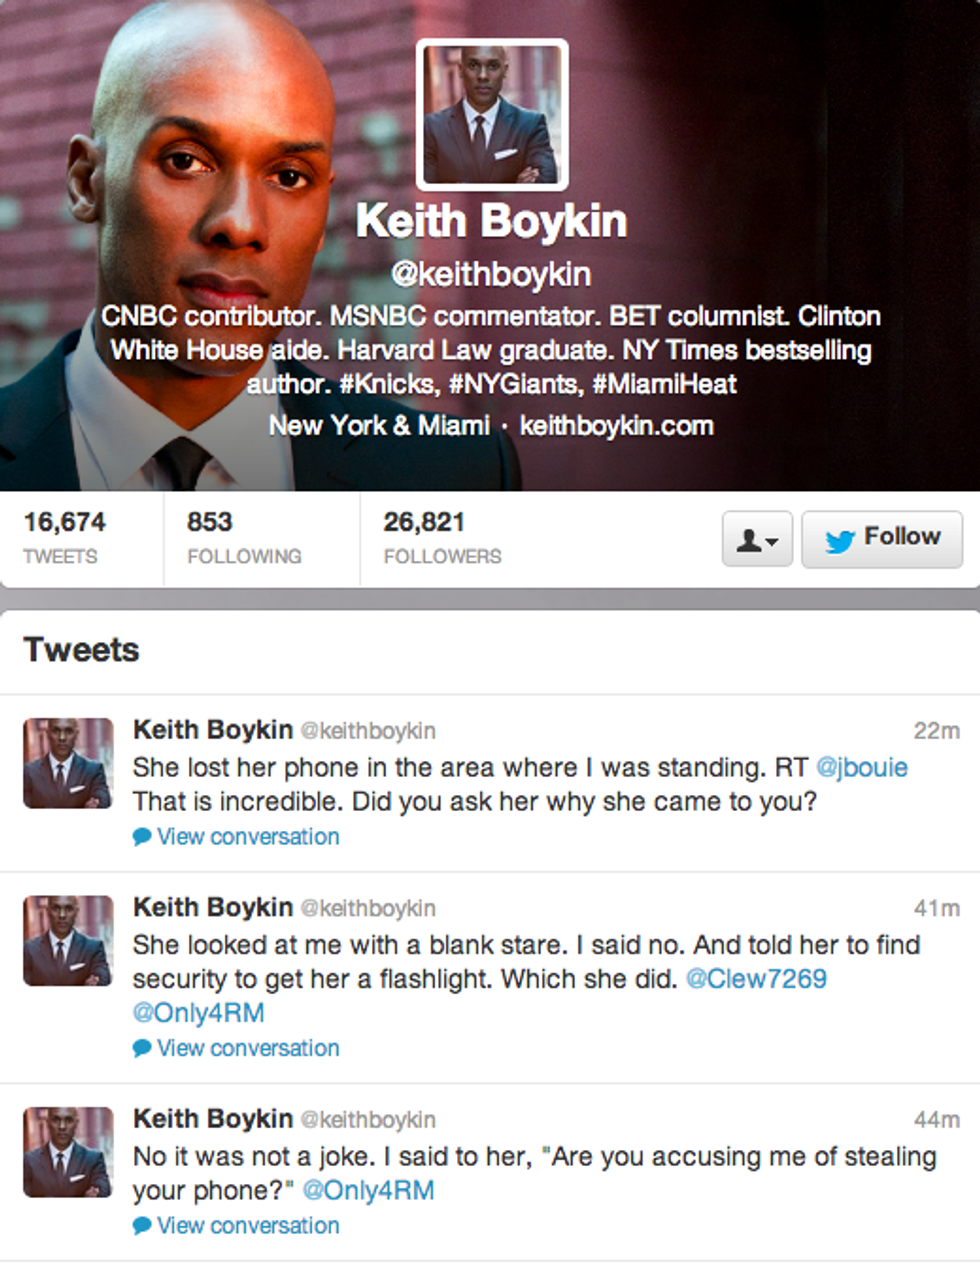 Why Did Black TV Pundit, Best-Selling Author And Former White House Aide Keith Boykin Steal That White Lady's Phone?